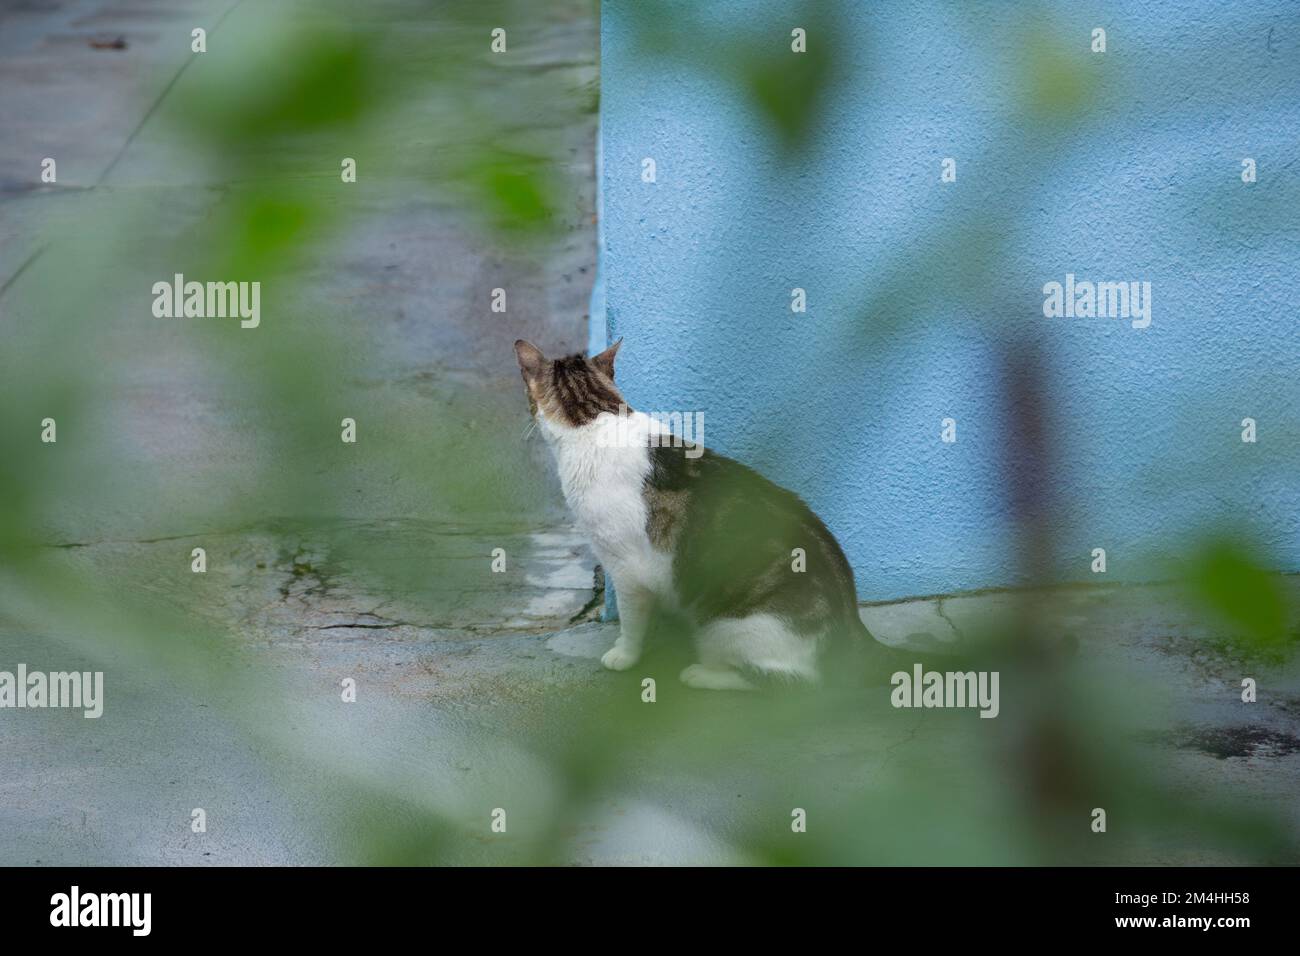 Goiania, Goiás, Brazil – December 20, 2022: A tabby cat sitting on the concrete floor, waiting behind the blue wall, seen through the leaves of a tree Stock Photo